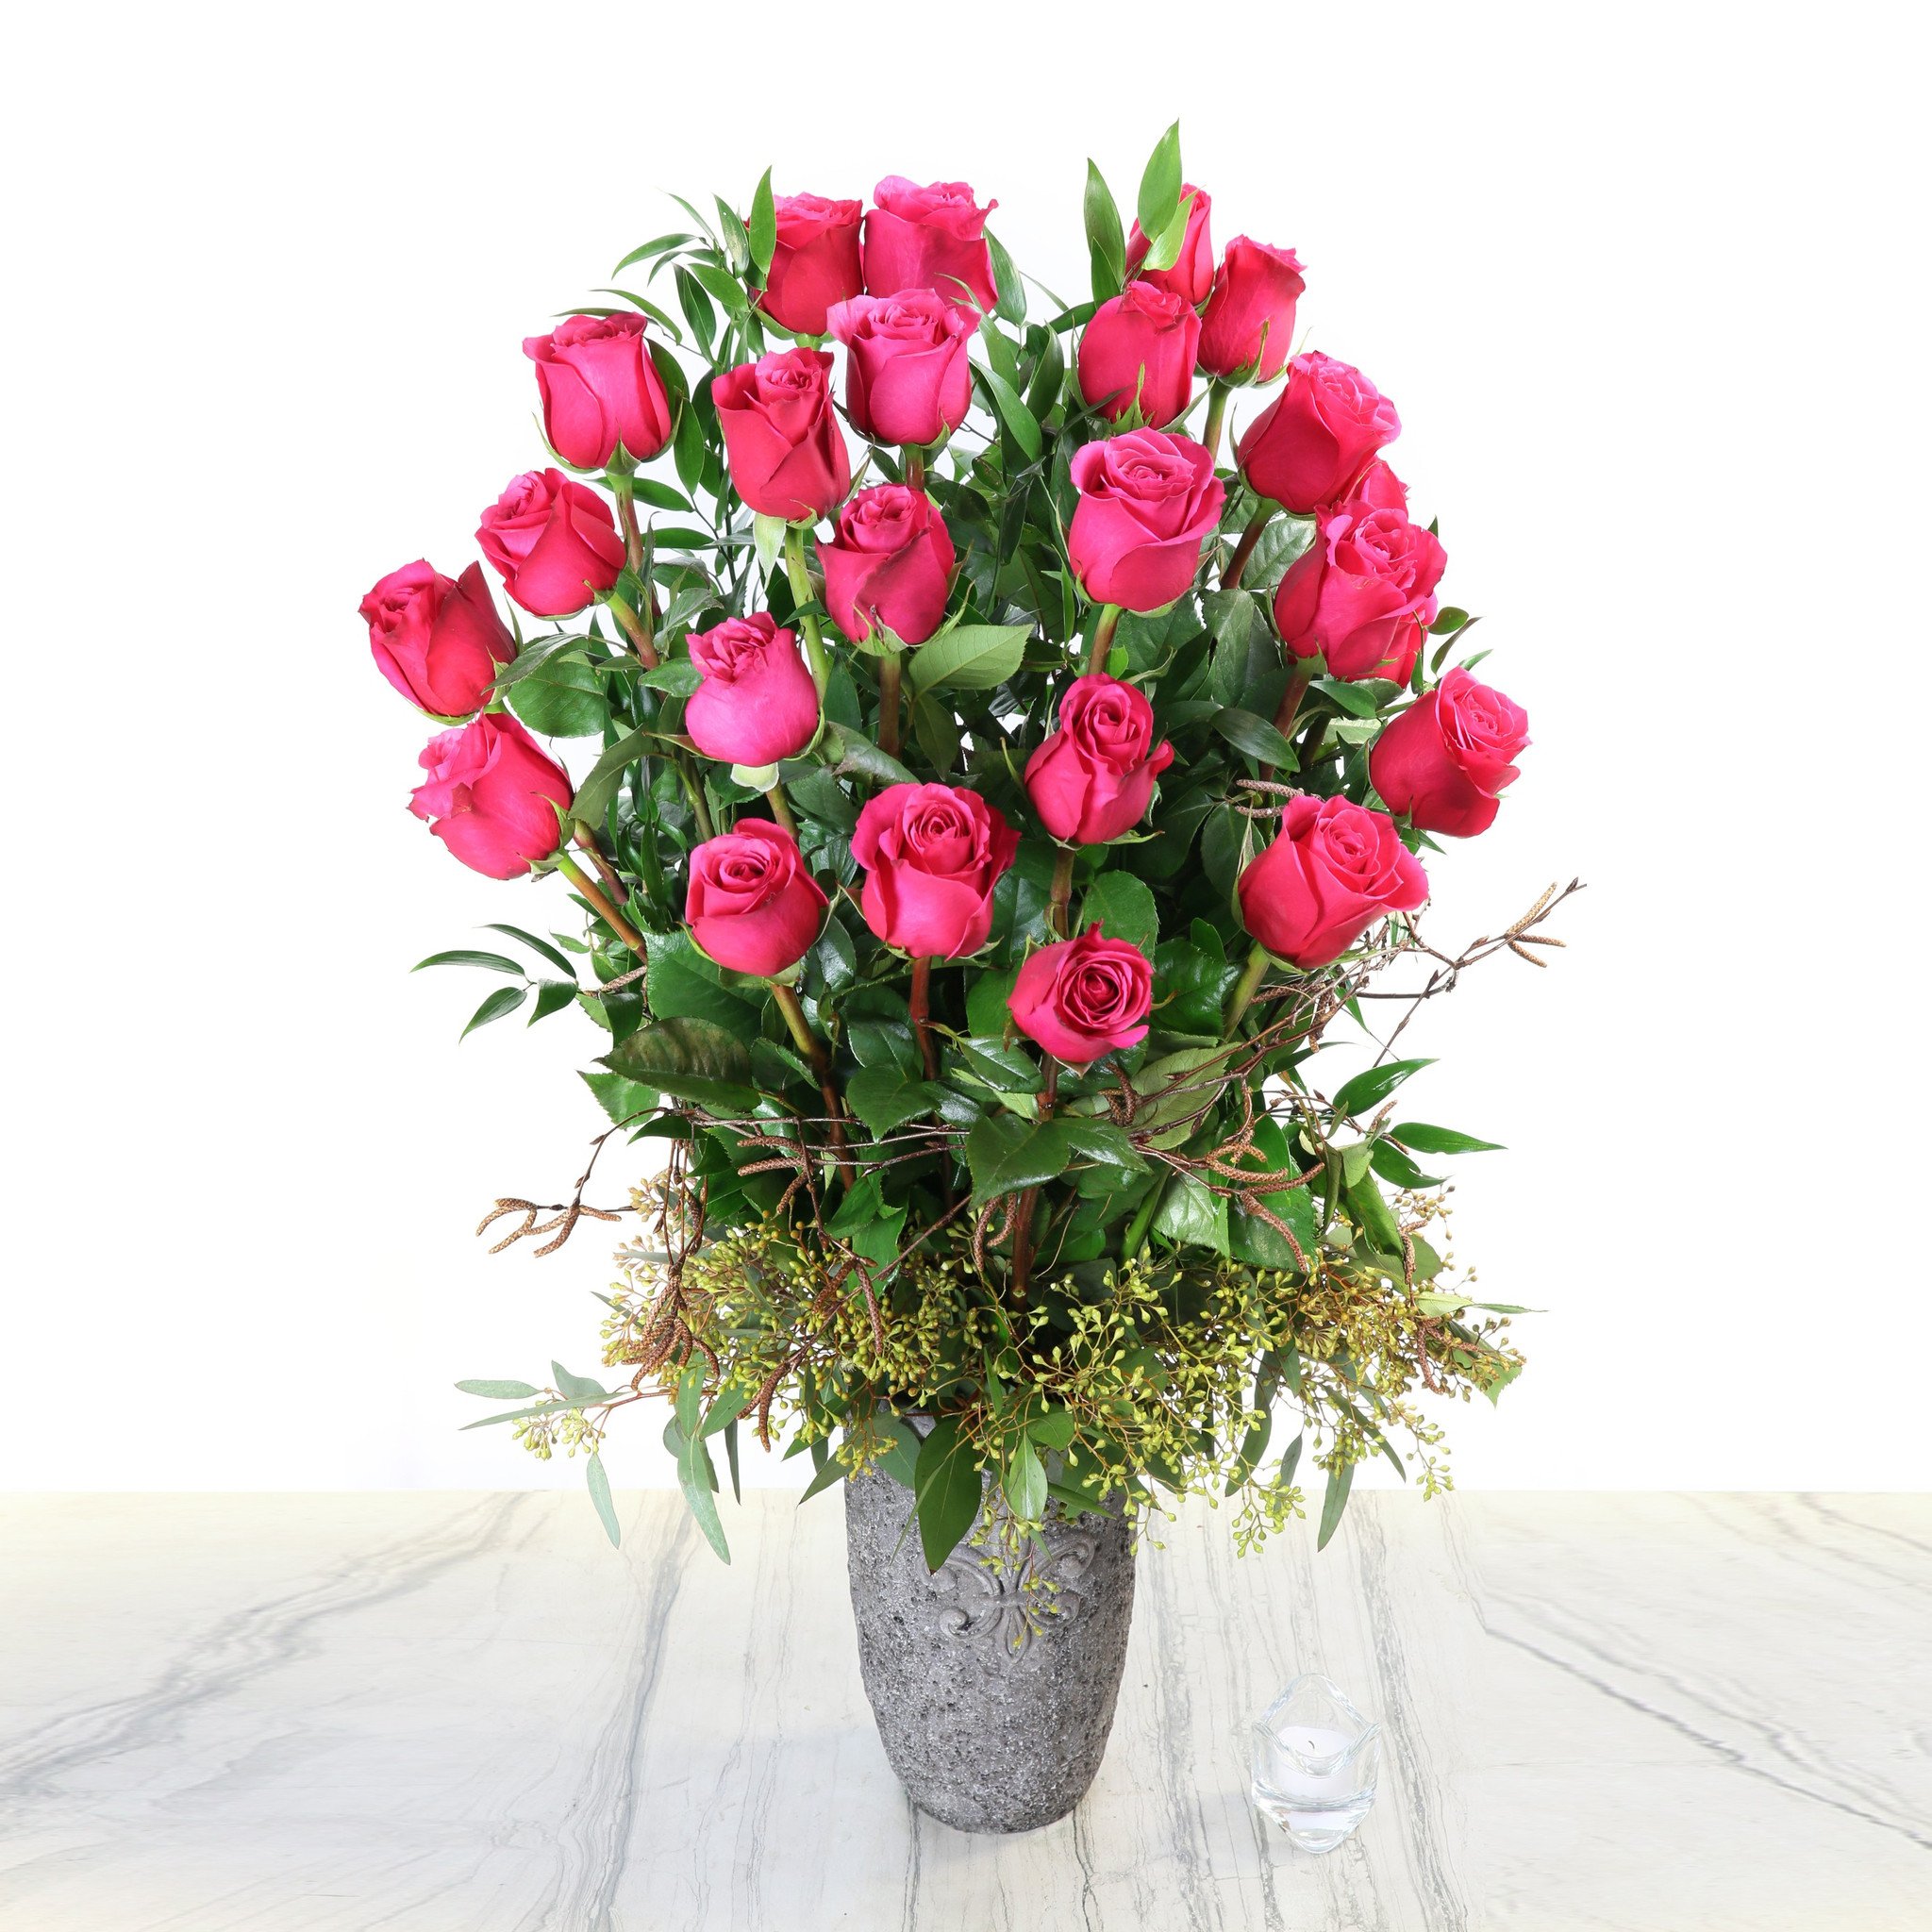 24 Long Stem Pink Roses With A Container. – My Boutique Florist